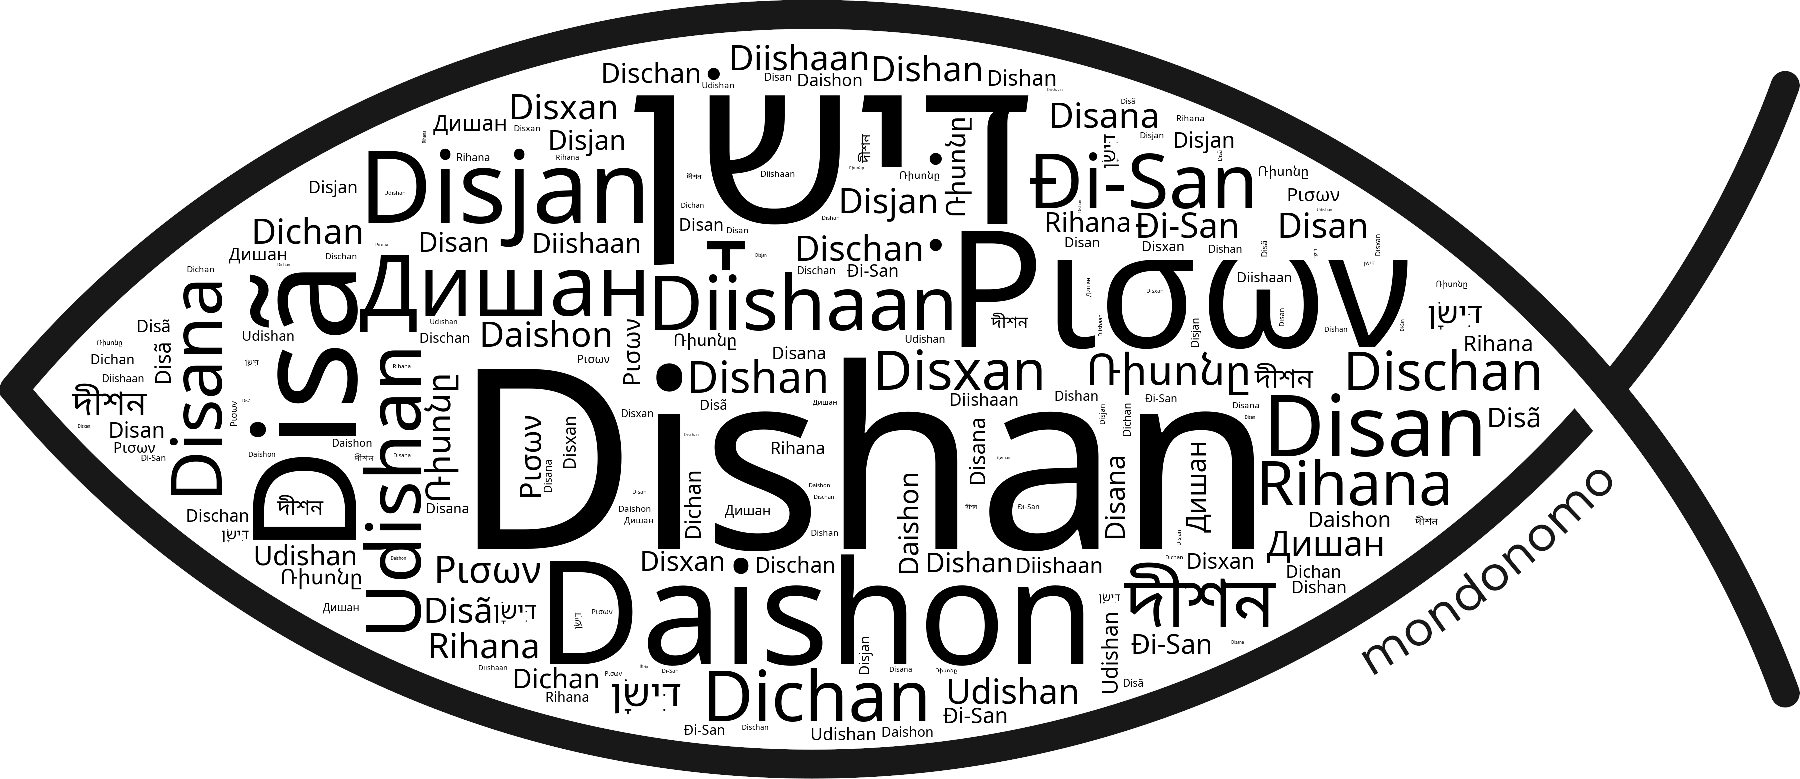 Name Dishan in the world's Bibles